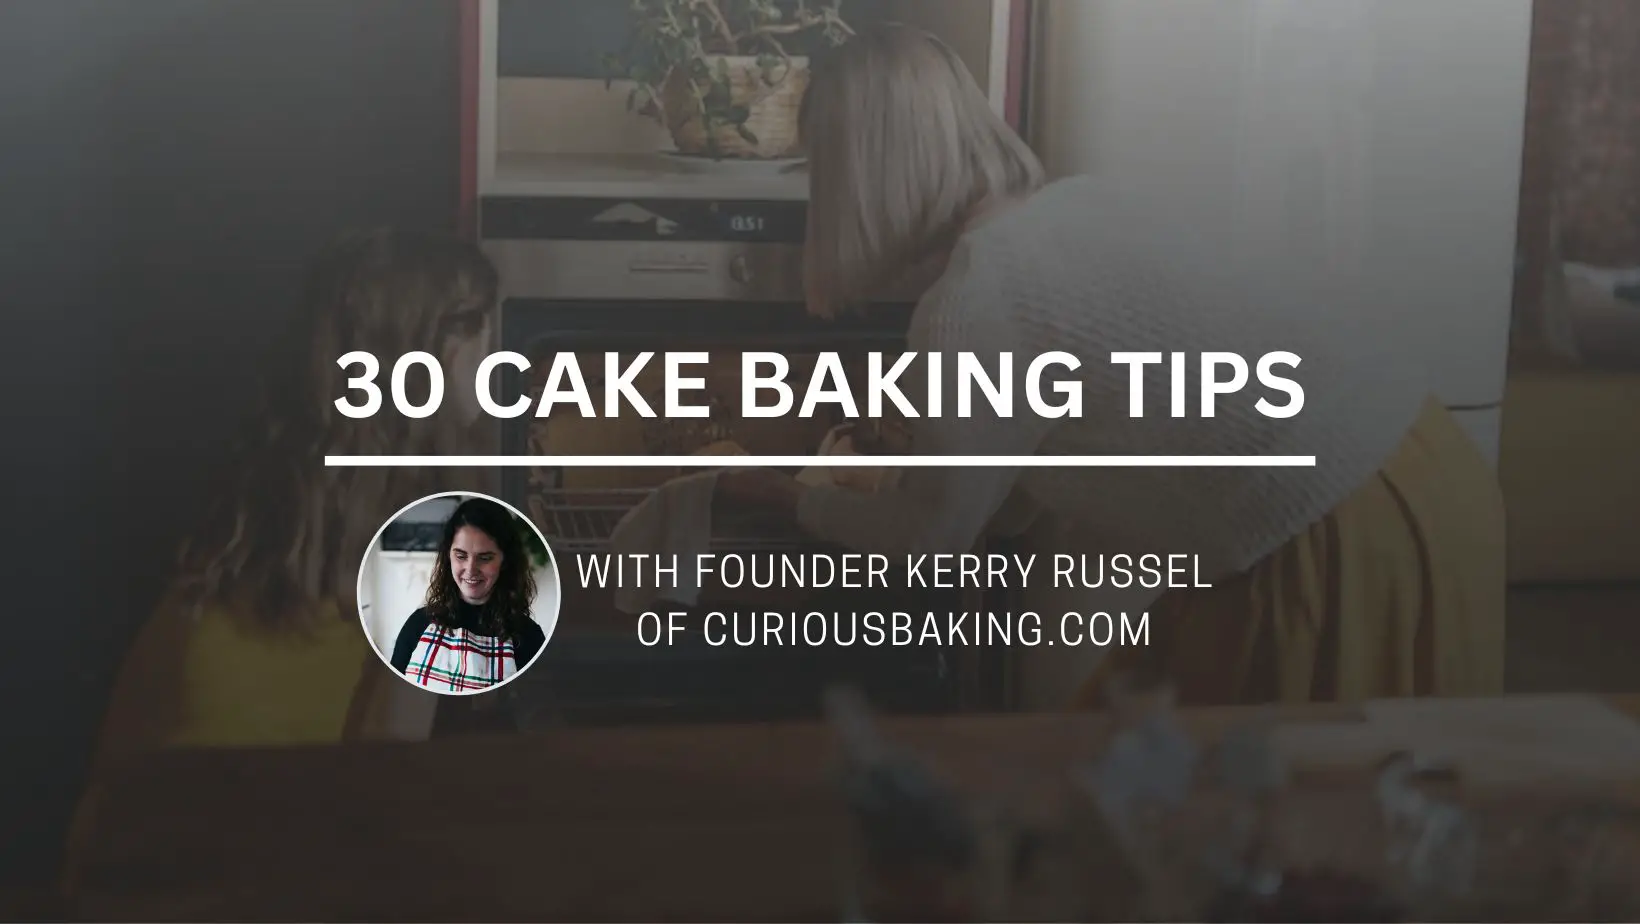 30 Cake Baking Tips by CuriousBaking.com